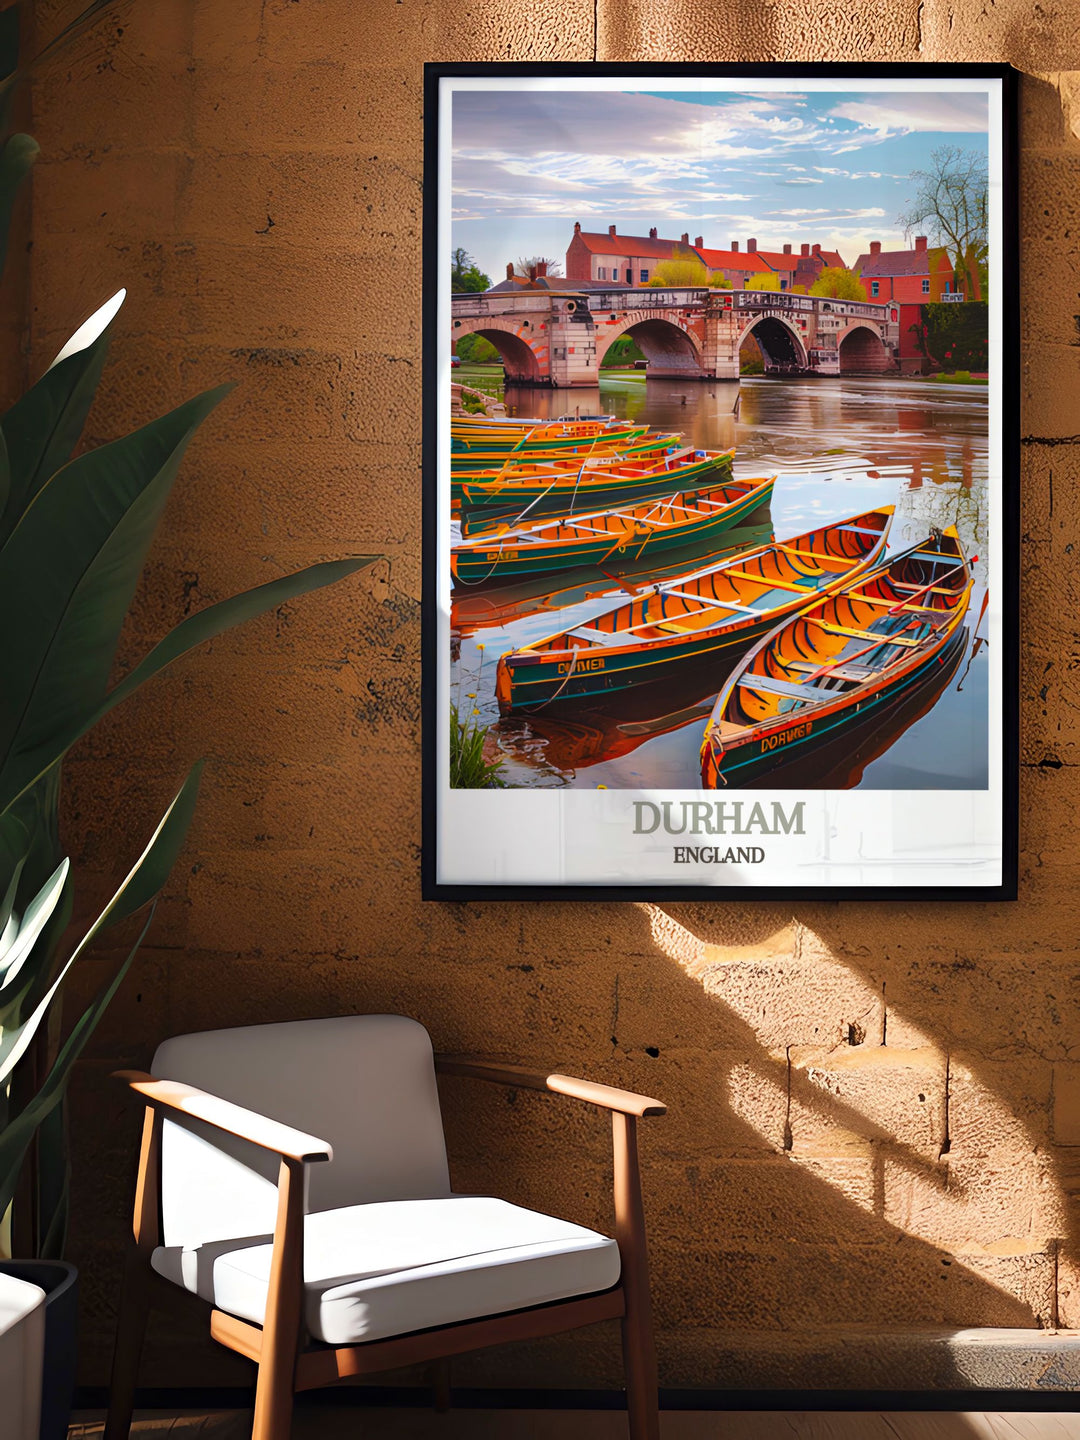 Durhams rich history and scenic river views are celebrated in this poster, featuring the iconic River Wear and inviting you to explore its enchanting paths.